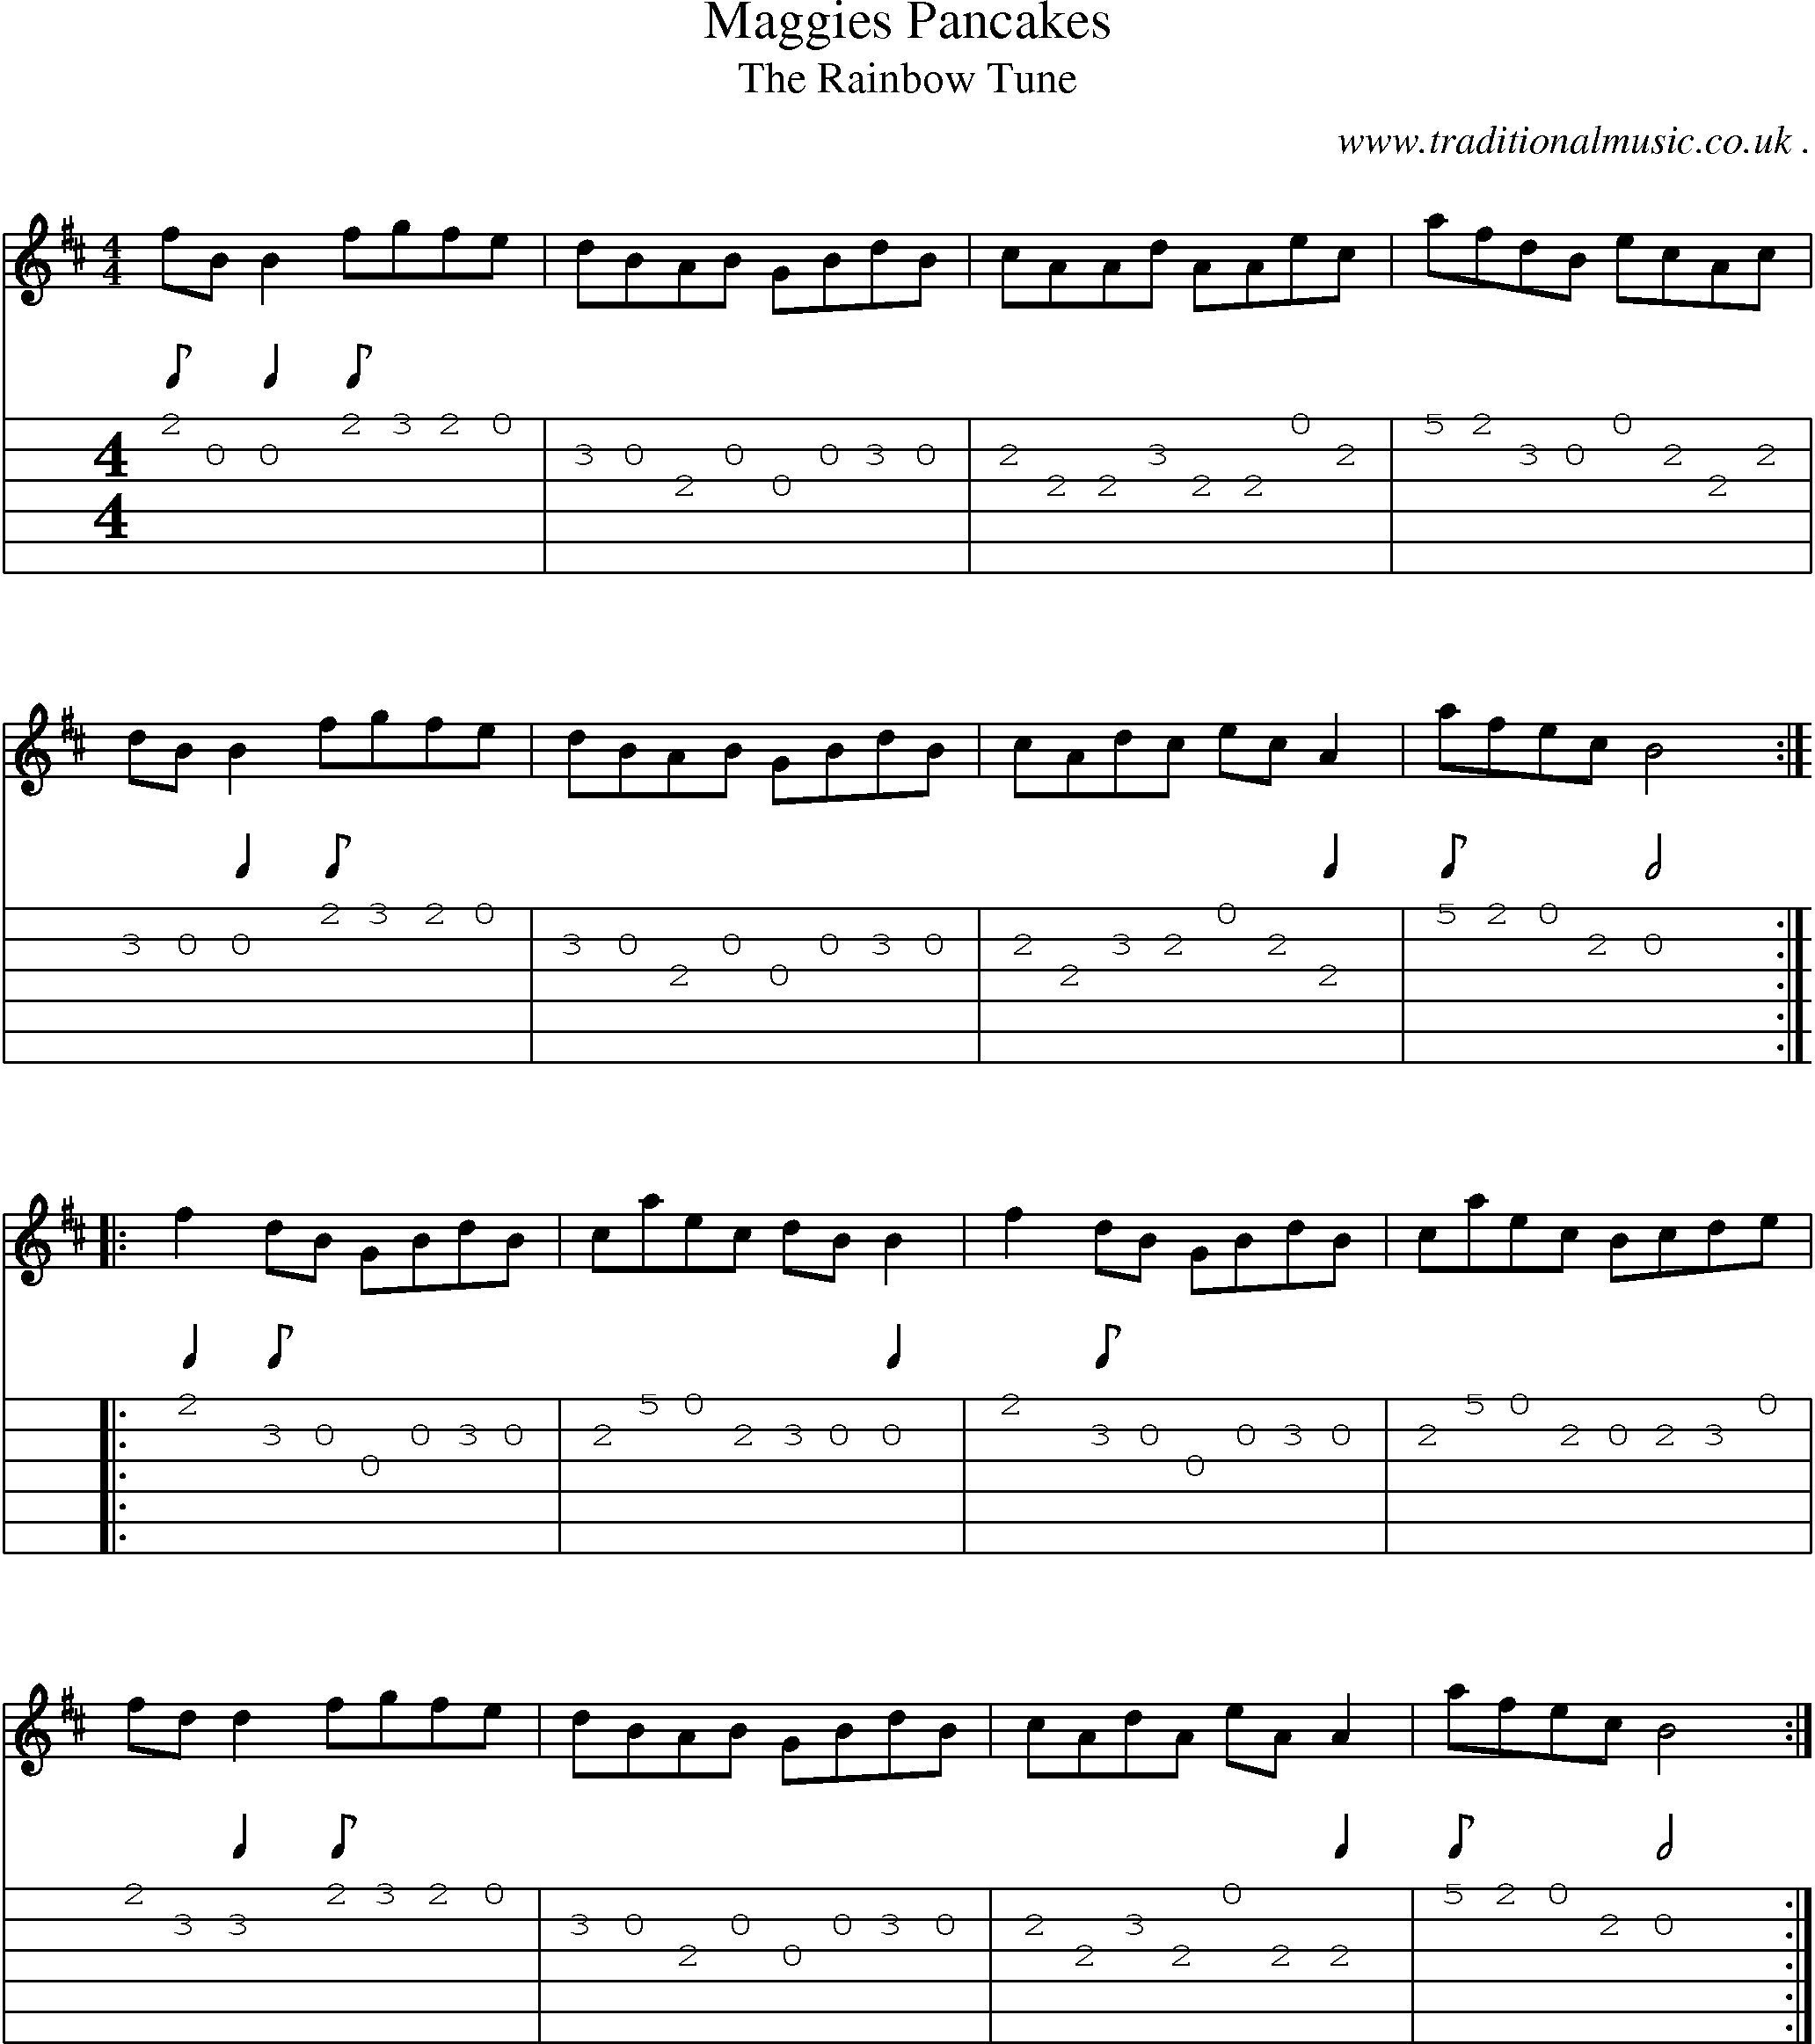 Sheet-Music and Guitar Tabs for Maggies Pancakes